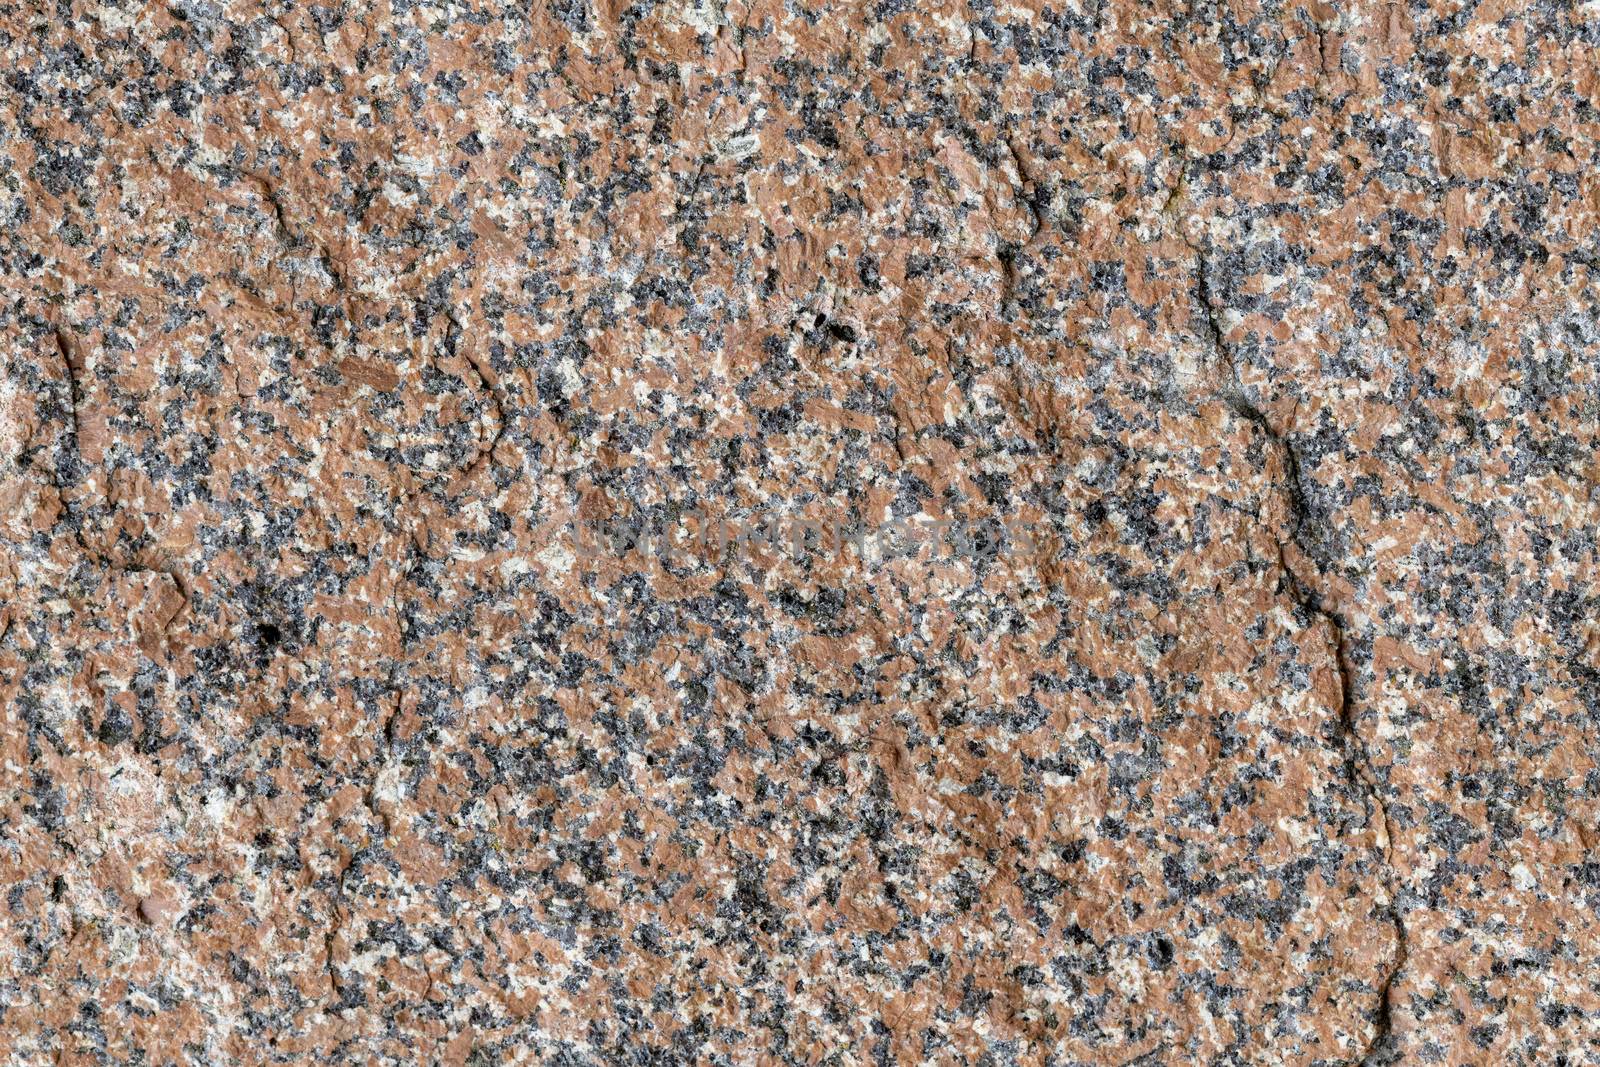 Granite as full-screen background picture
 by Tofotografie